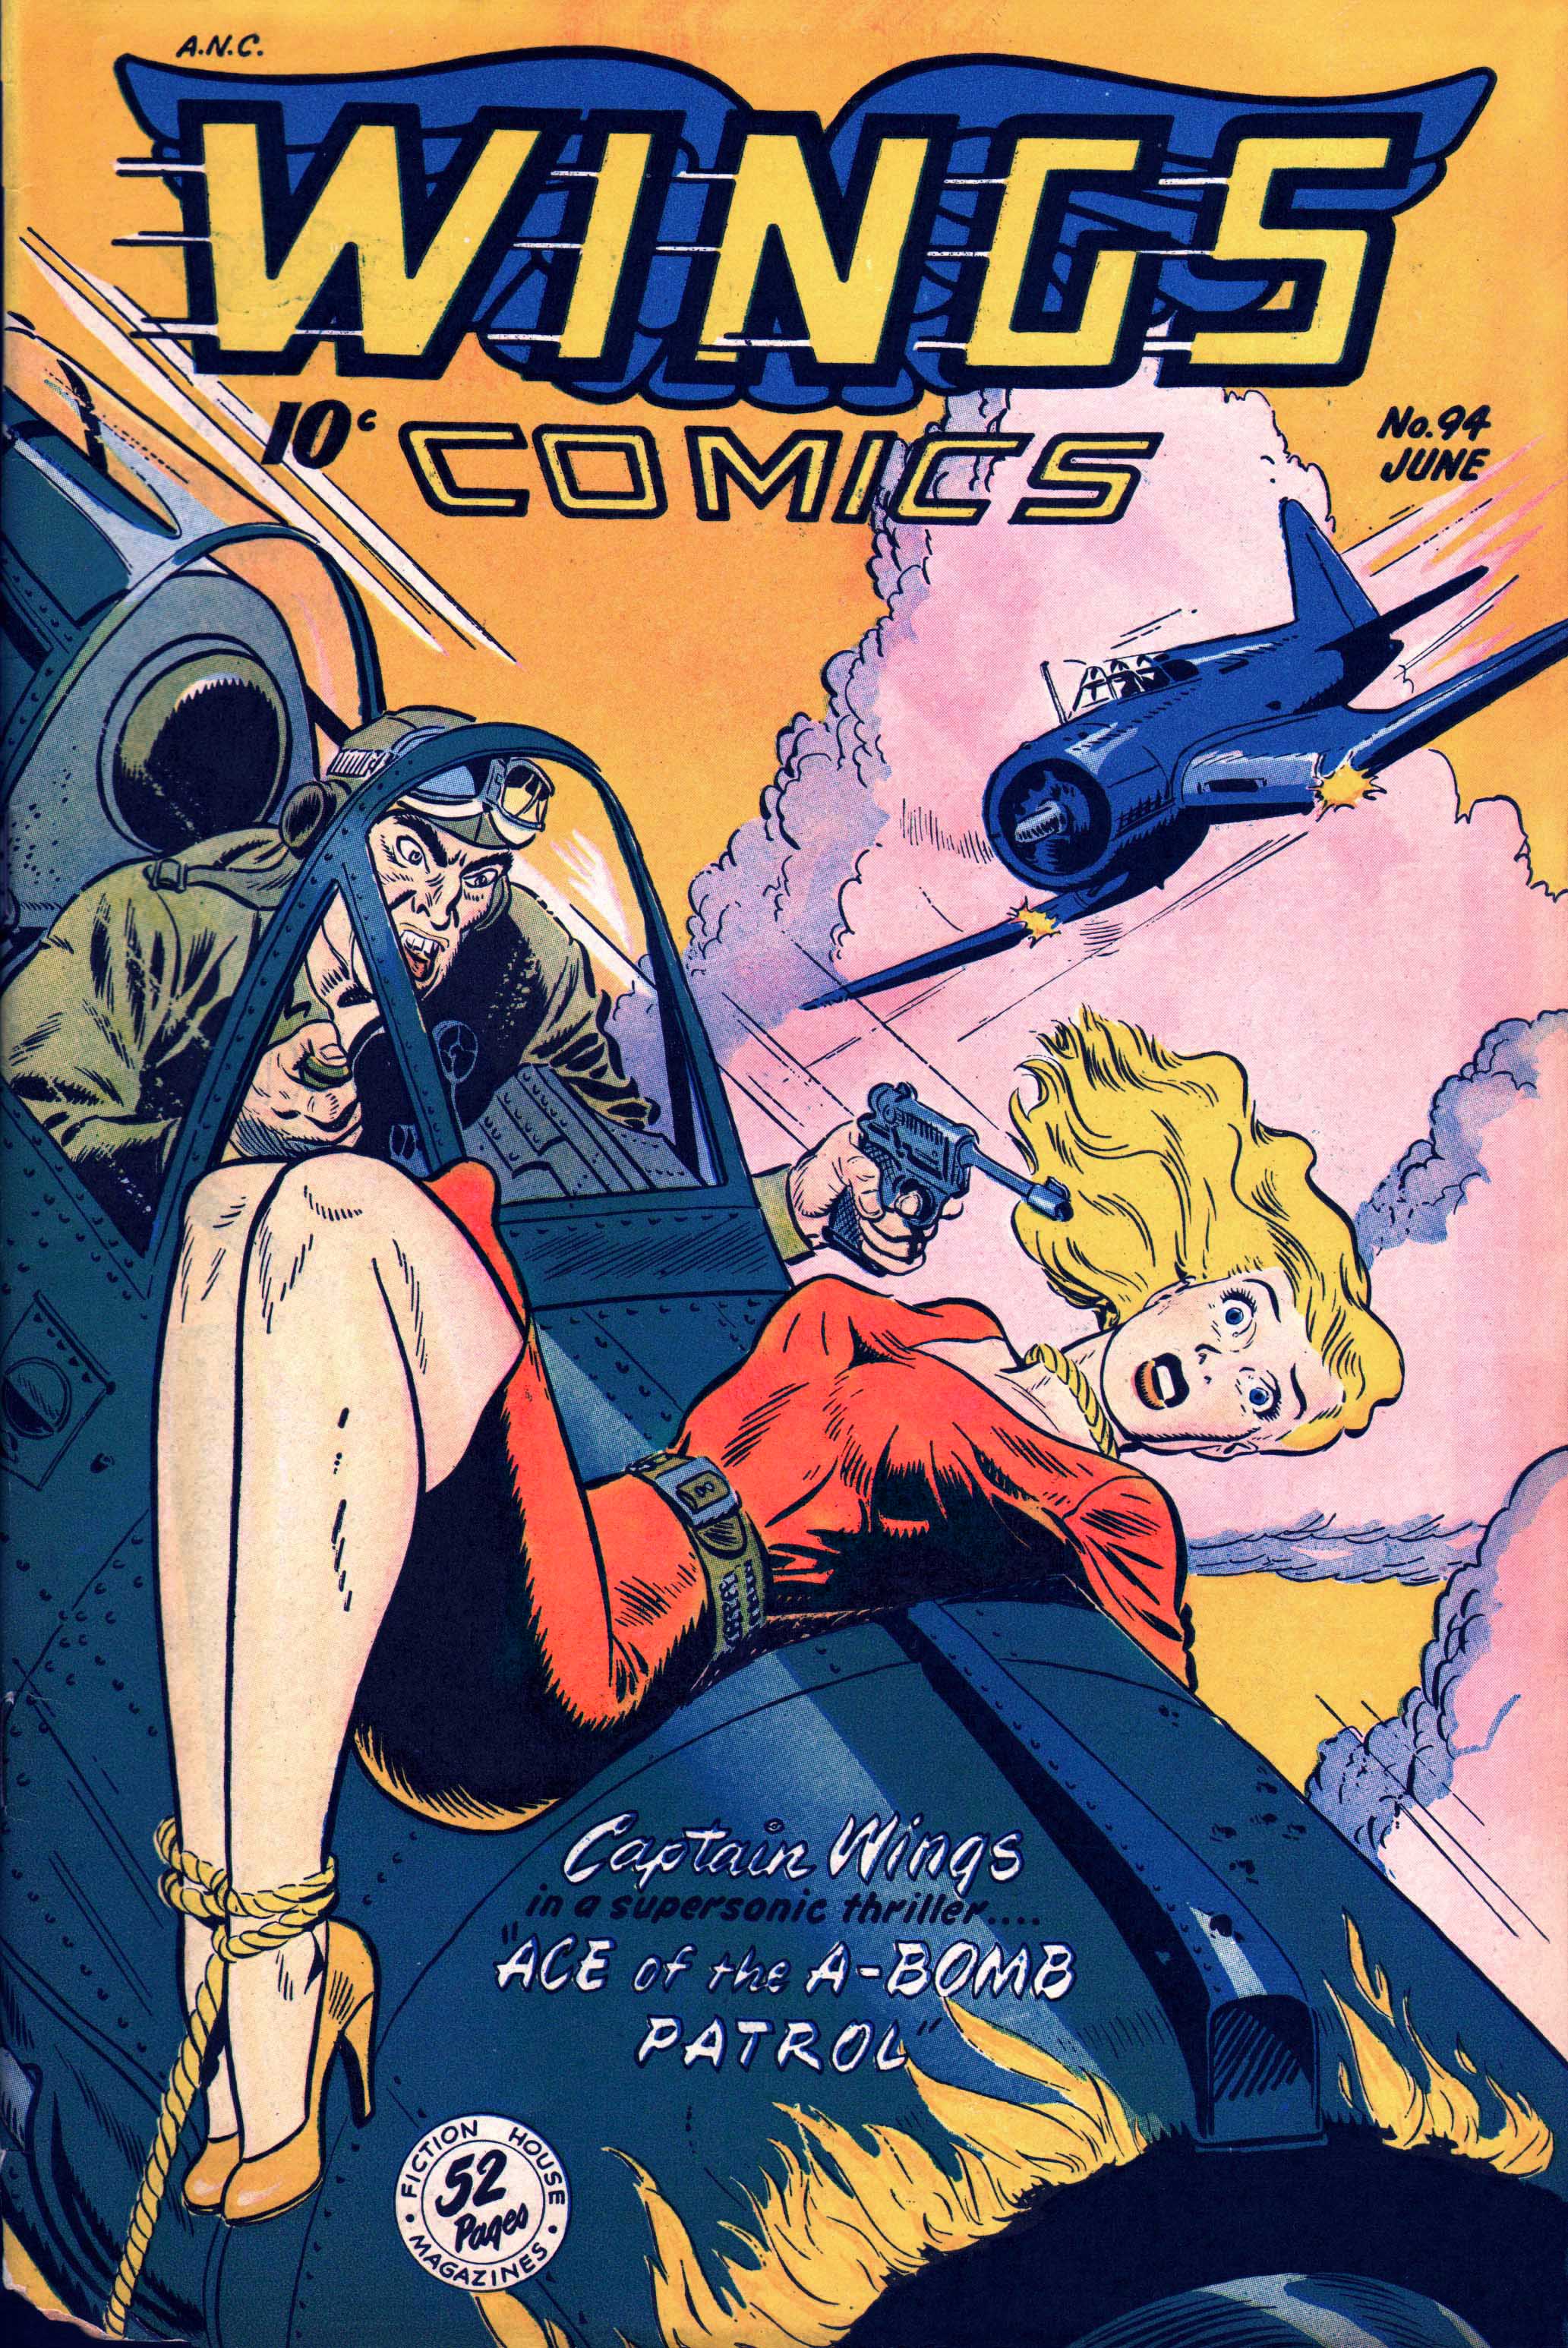 Wings Comics #94 by Fiction House